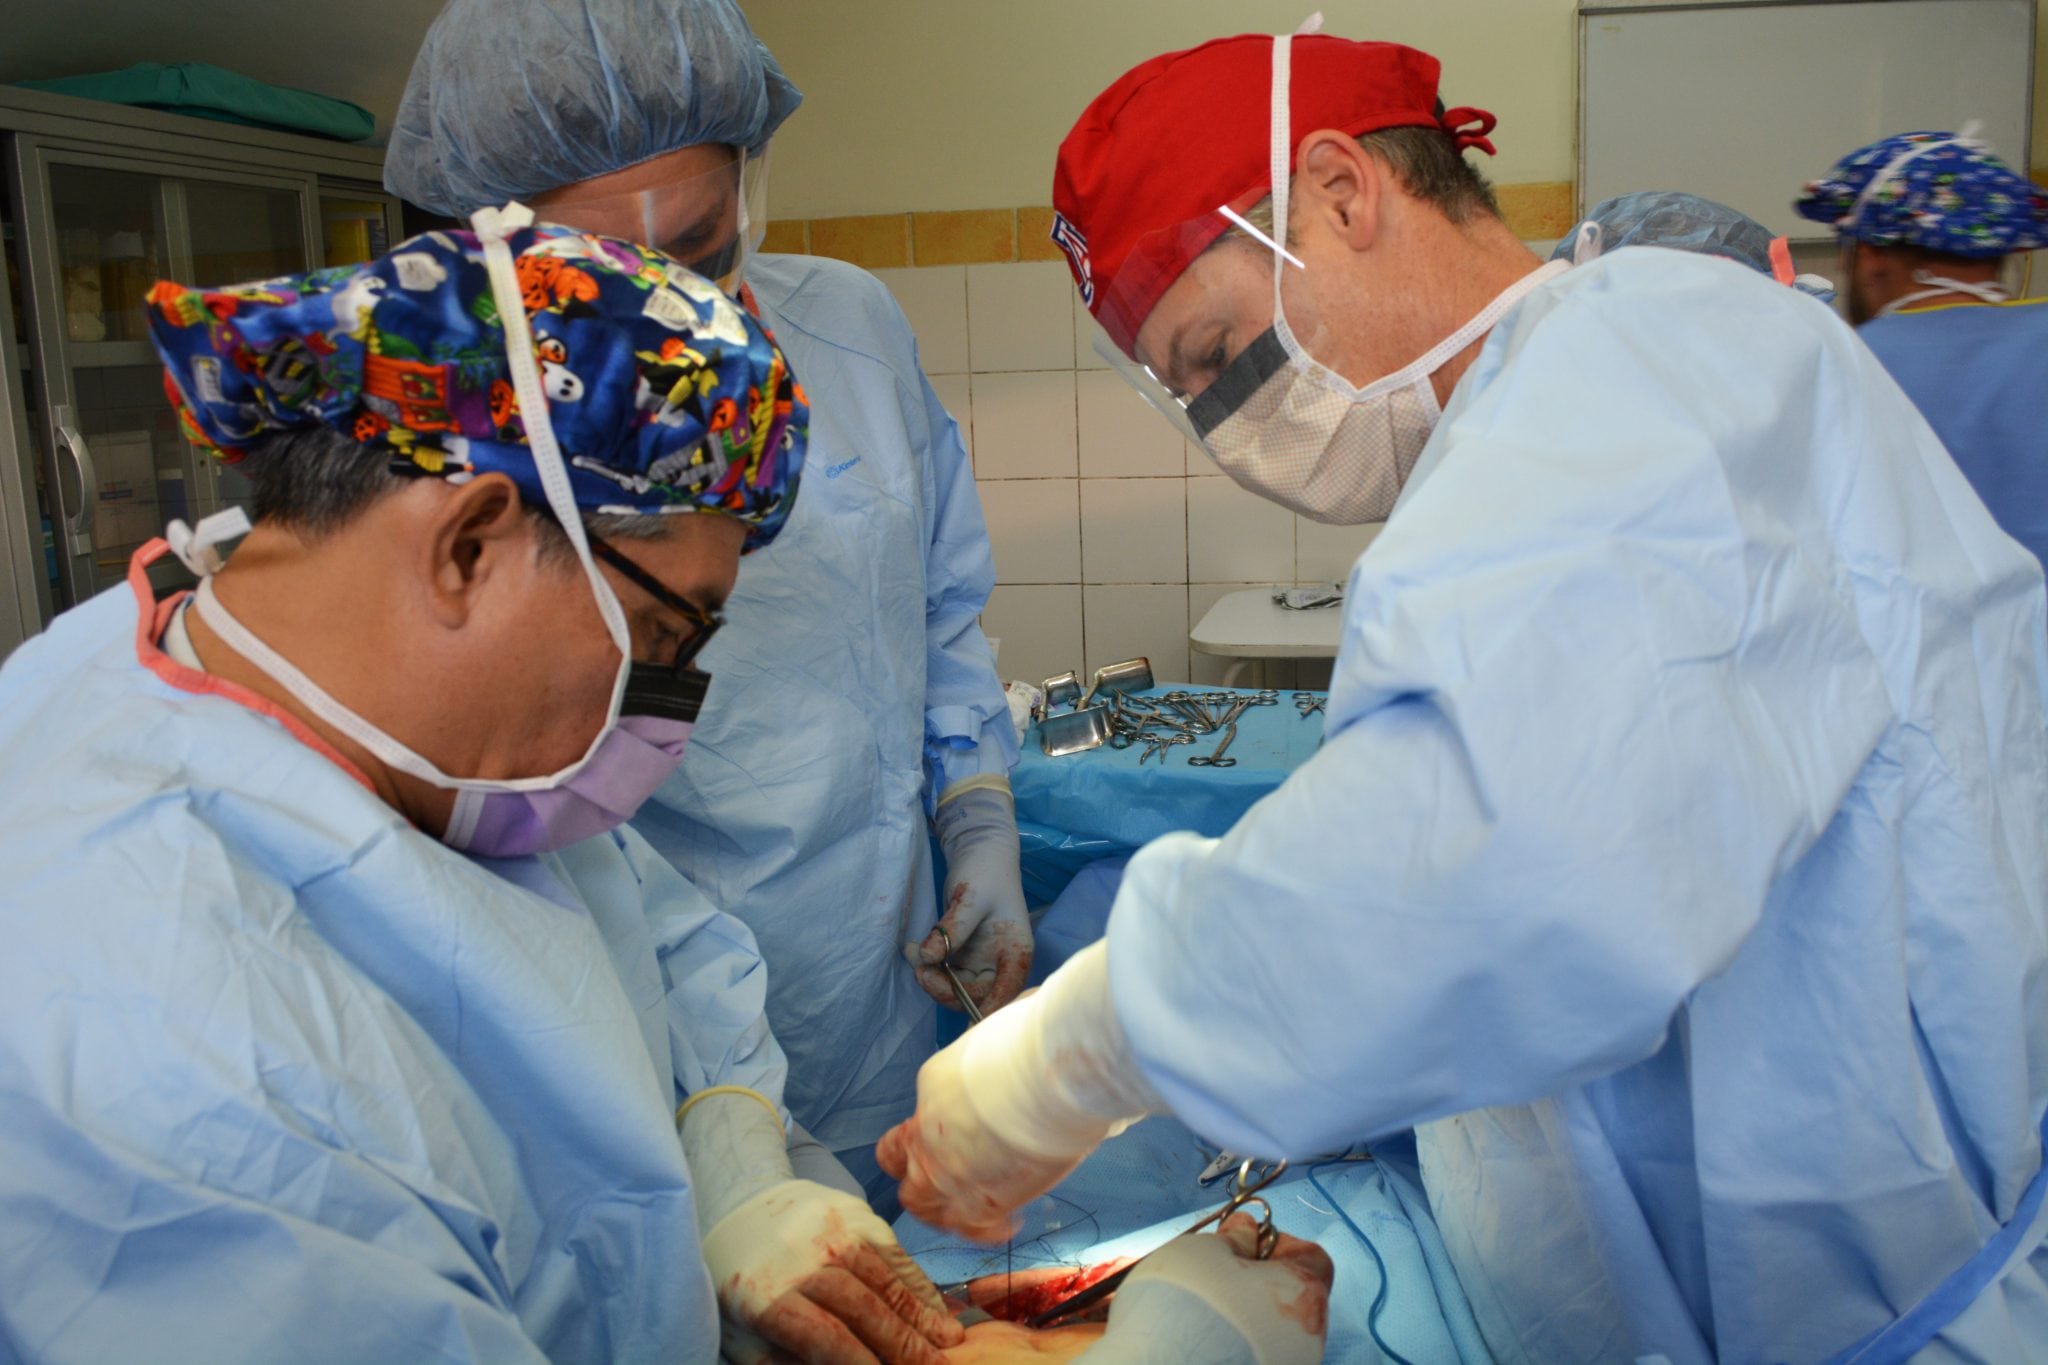 A group of surgeons working on a patient in Bolivia.